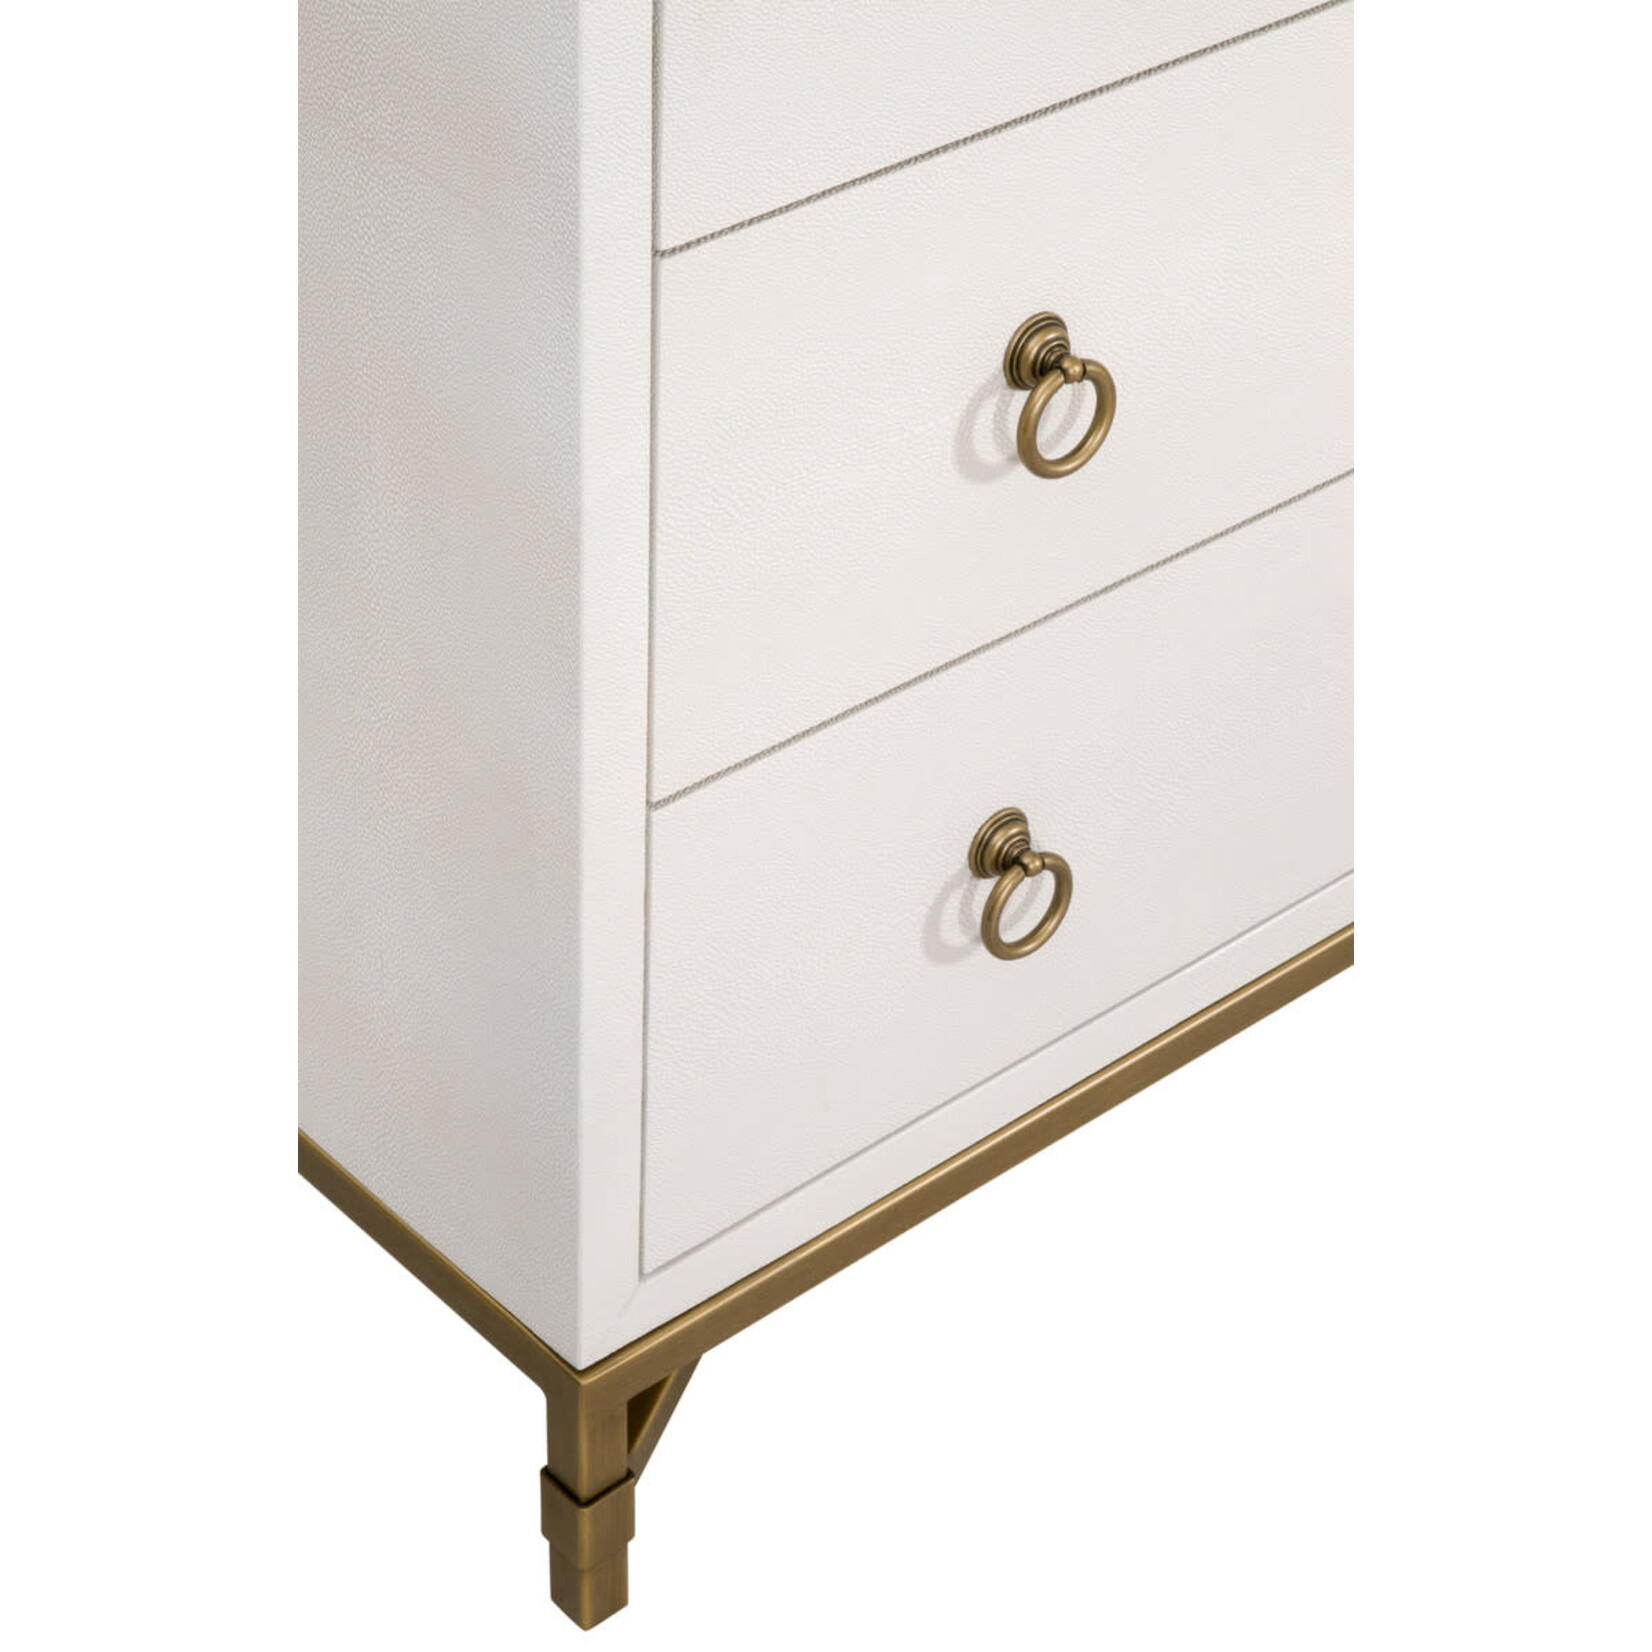 Outside The Box 68x20x38 Strand Shagreen Pearl White & Gold 6 Drawer Double Dresser